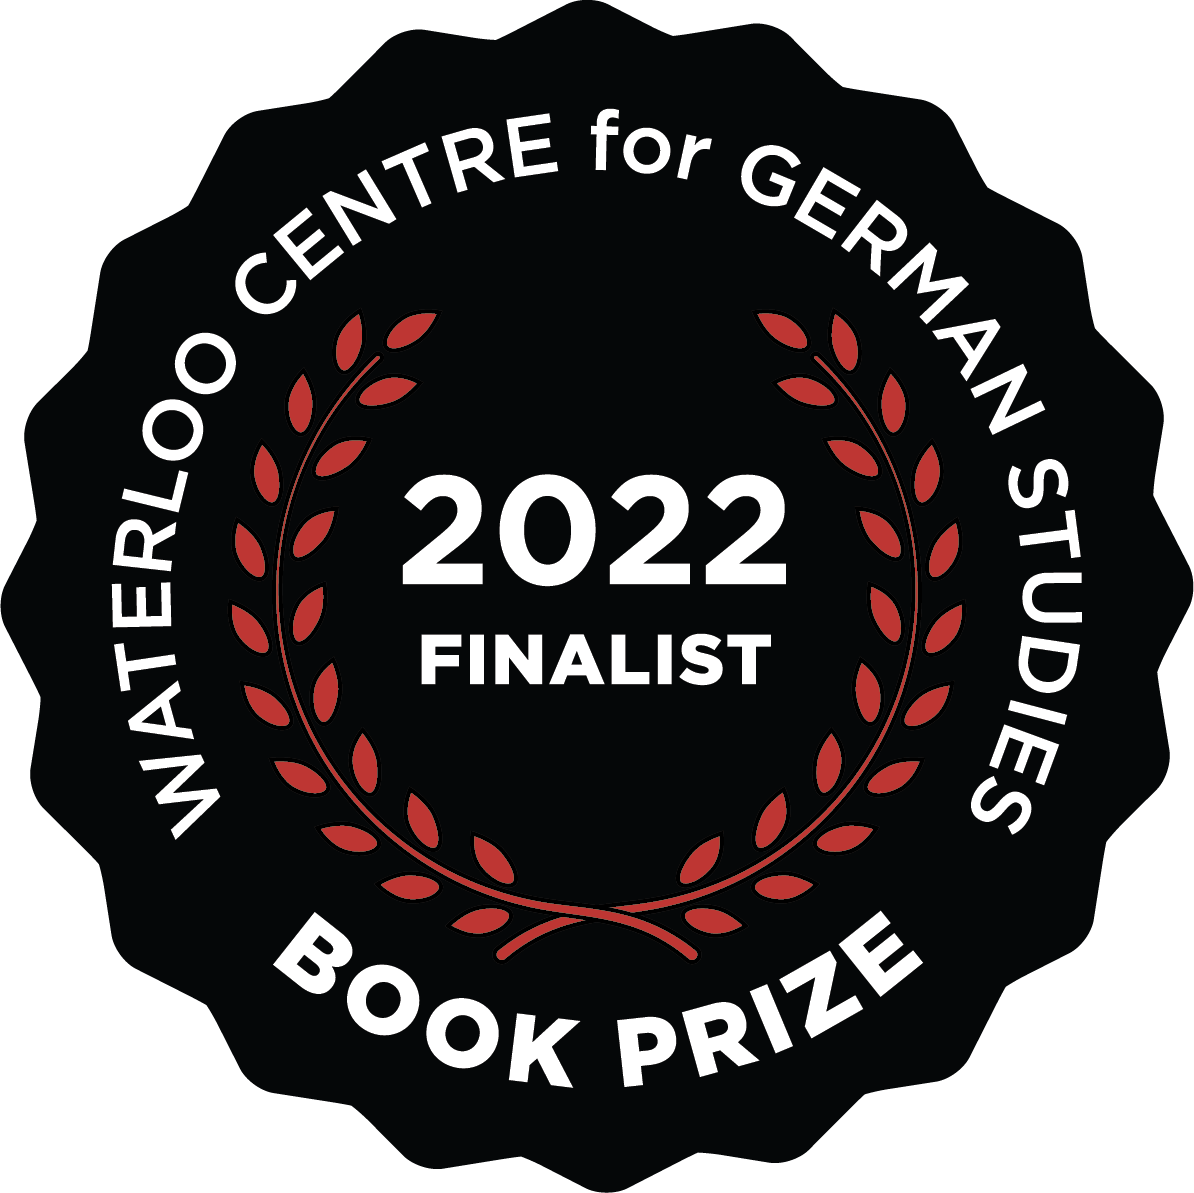 2022 Book Prize logo with red leaves framing